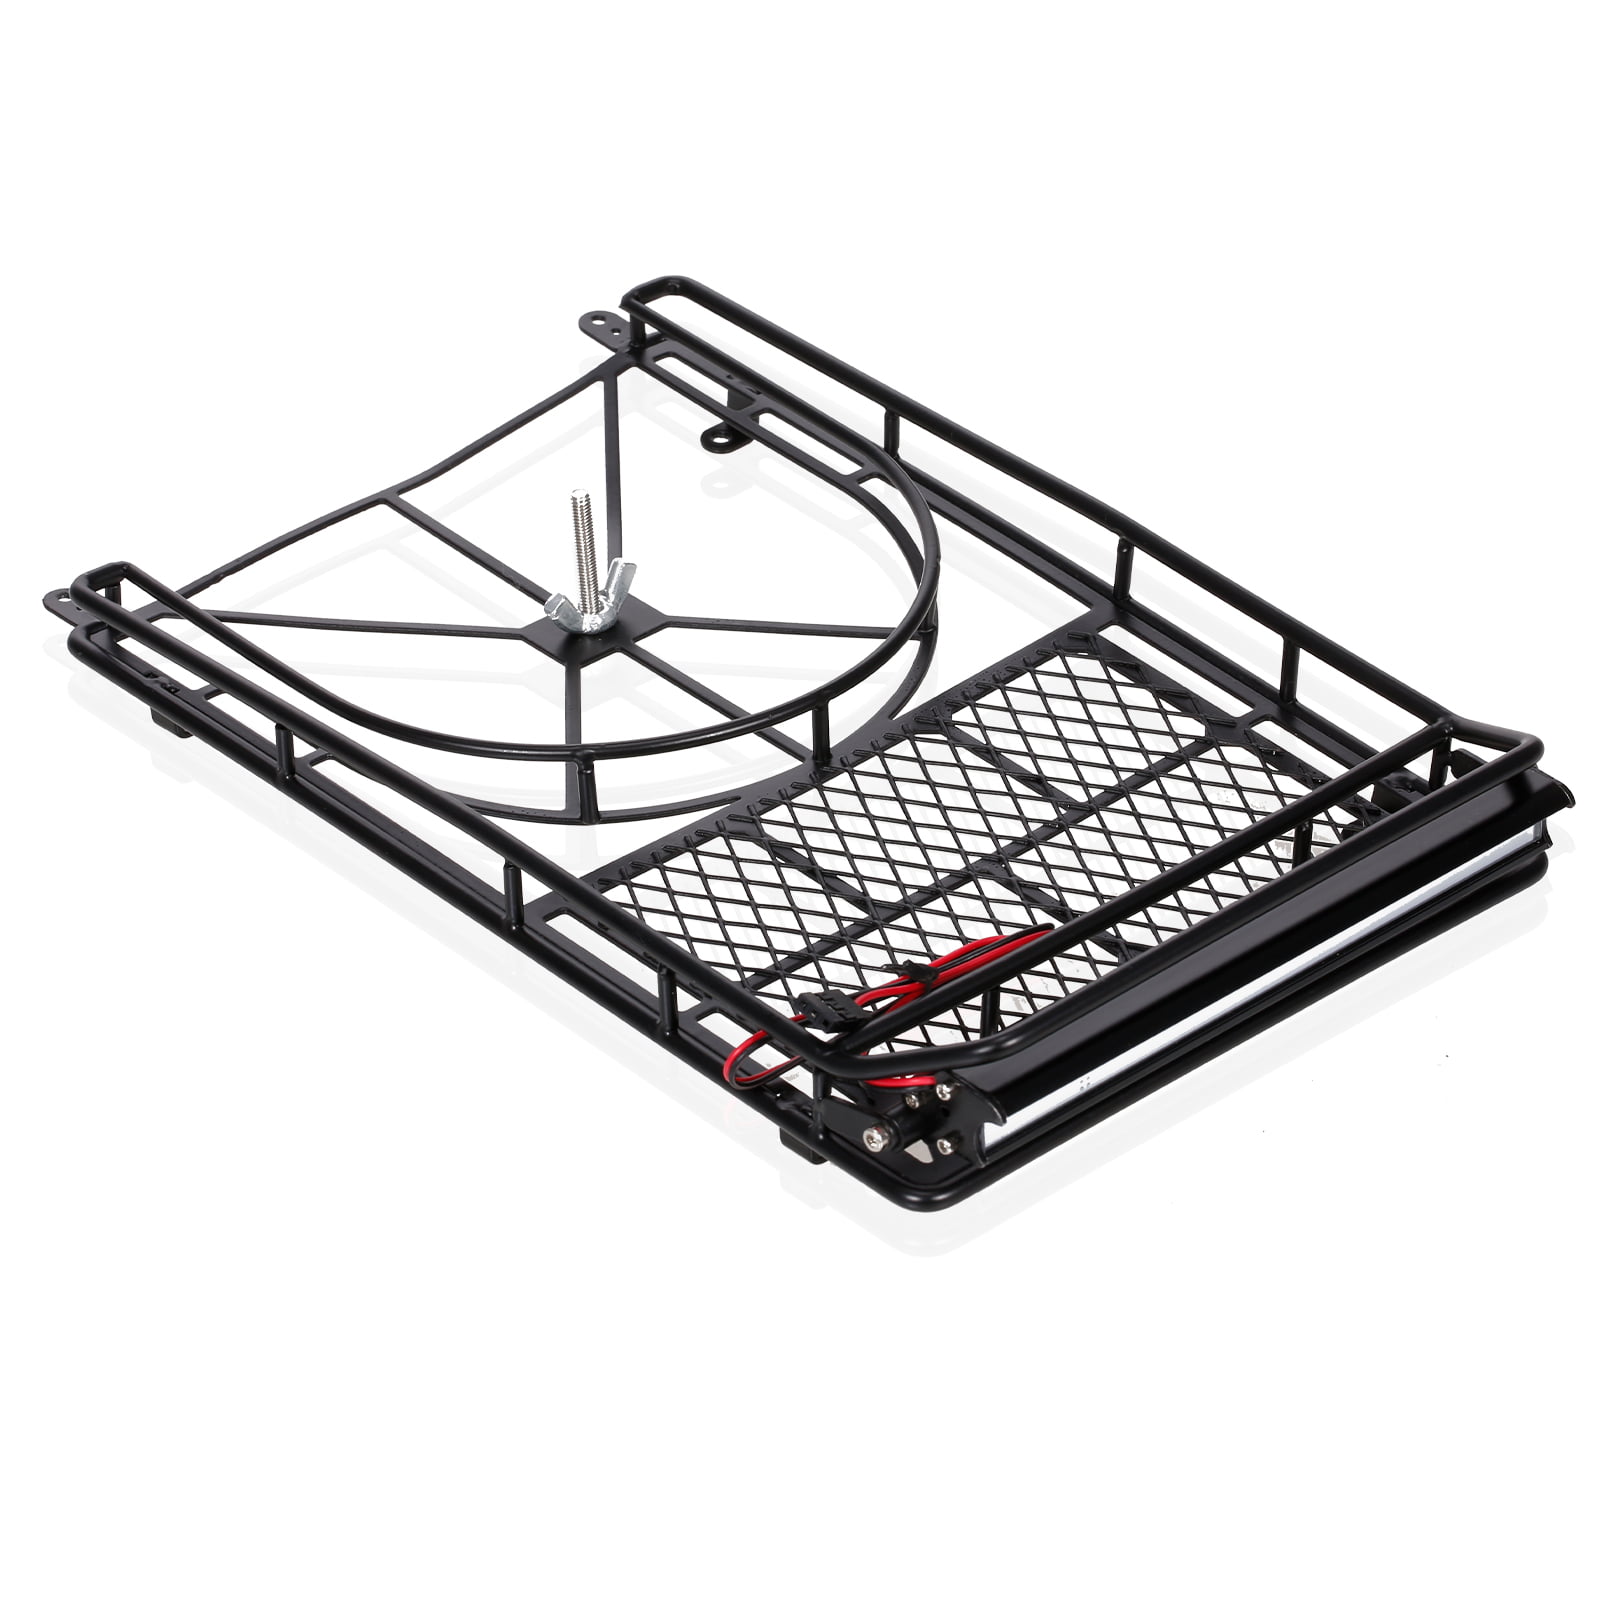 Roof Luggage Rack For 1:10 1:8 Traxxas Tamiya Axial SCX10 D90 Hpi RC Crawler Car 